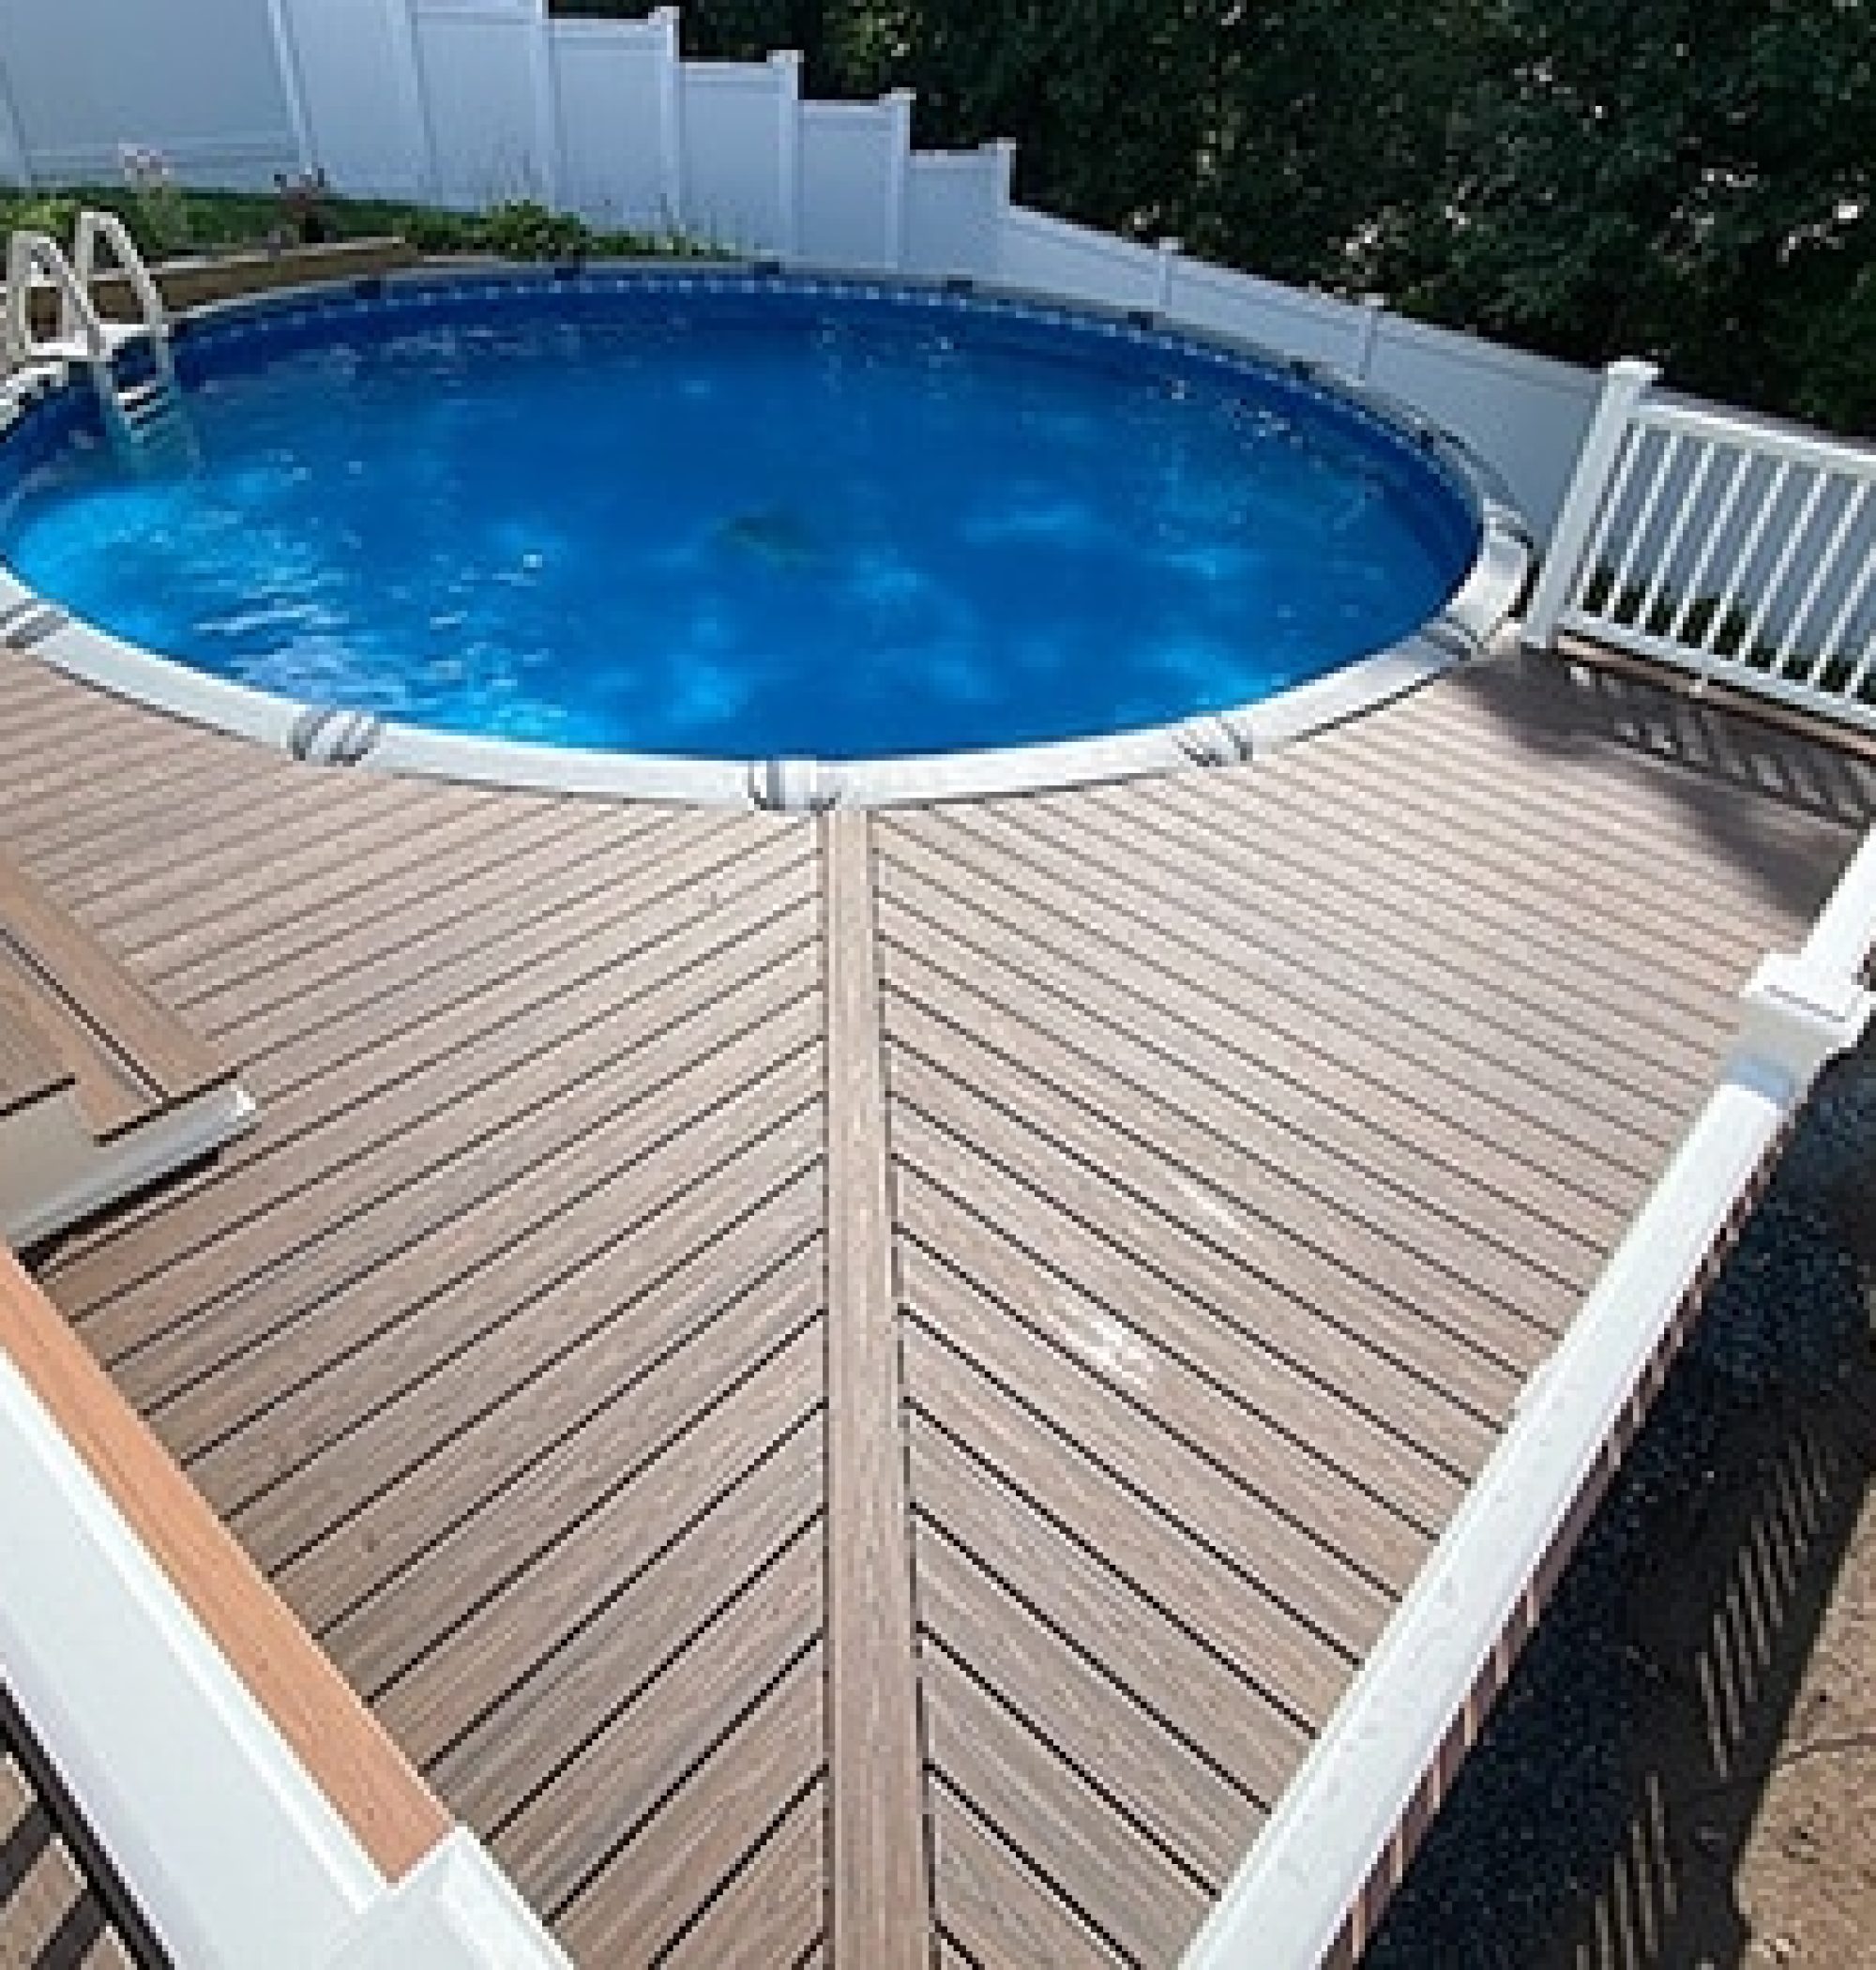 Custom Deck with pool | Pool with blue water with surrounding dark stained wood deck | Backyard Creations | Custom Decks, Porches, and Pergolas